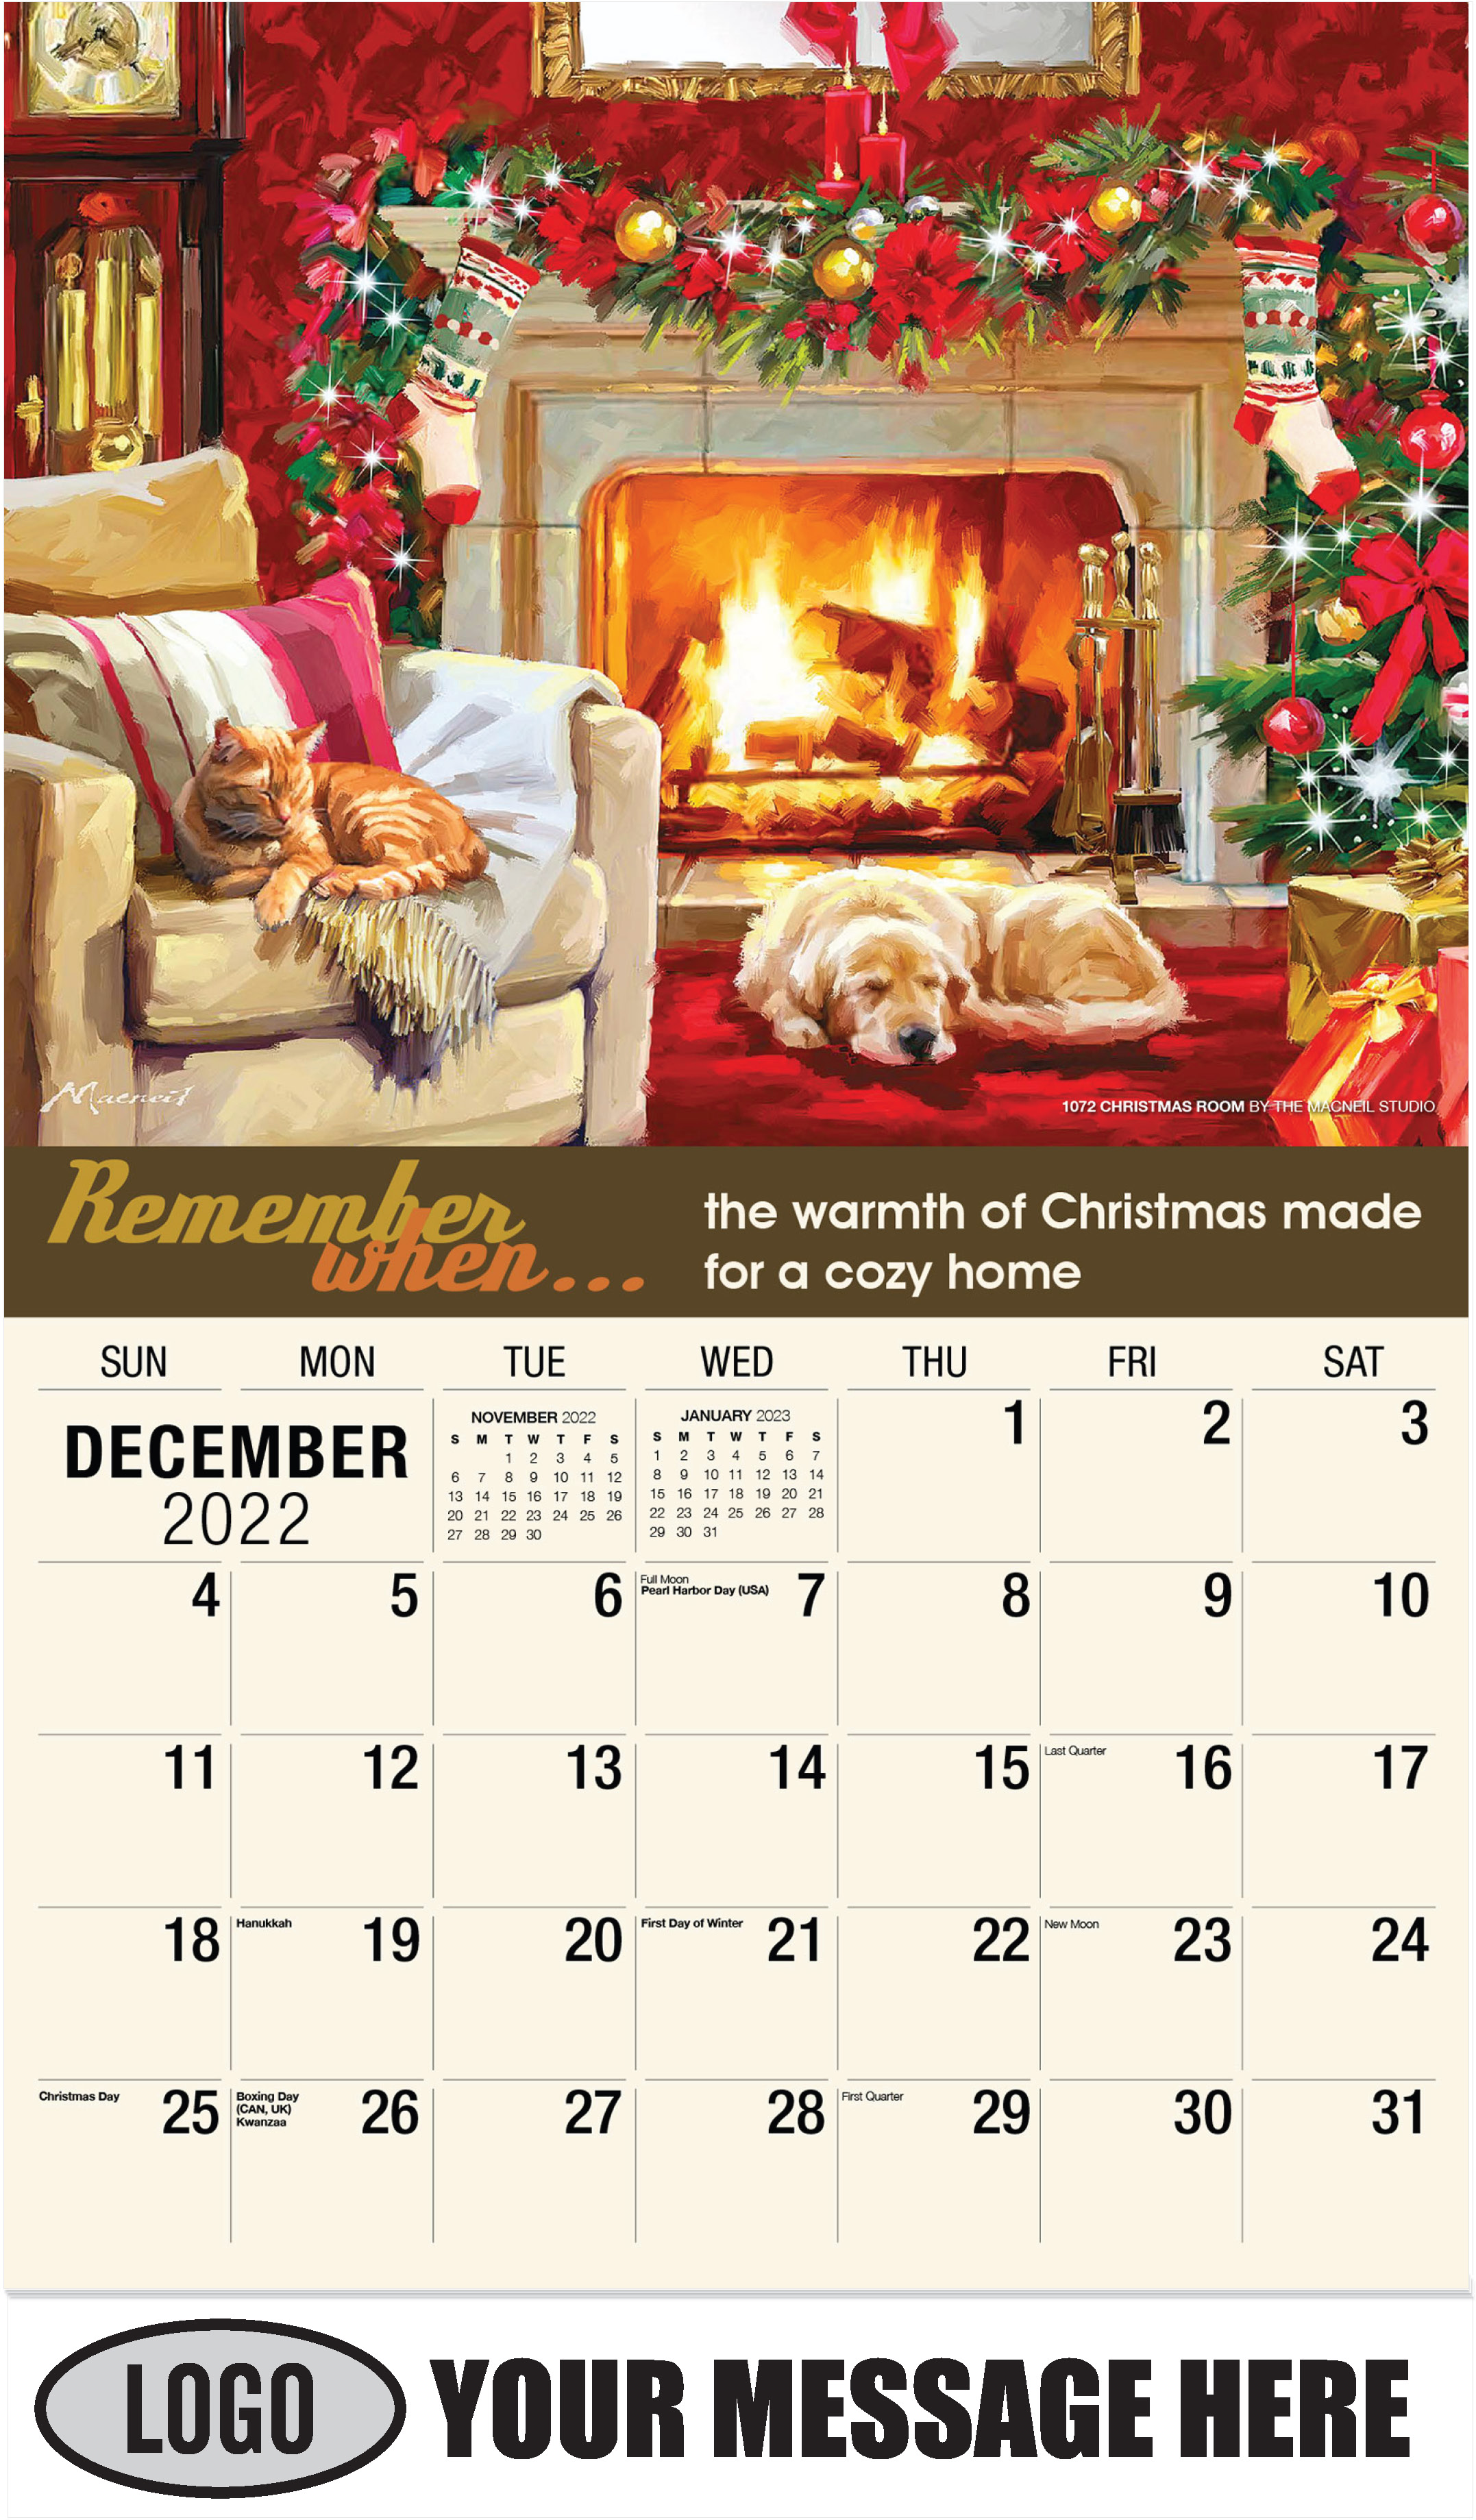 1072 Christmas Room by The Macneil Studio - December 2022 - Remember When 2023 Promotional Calendar